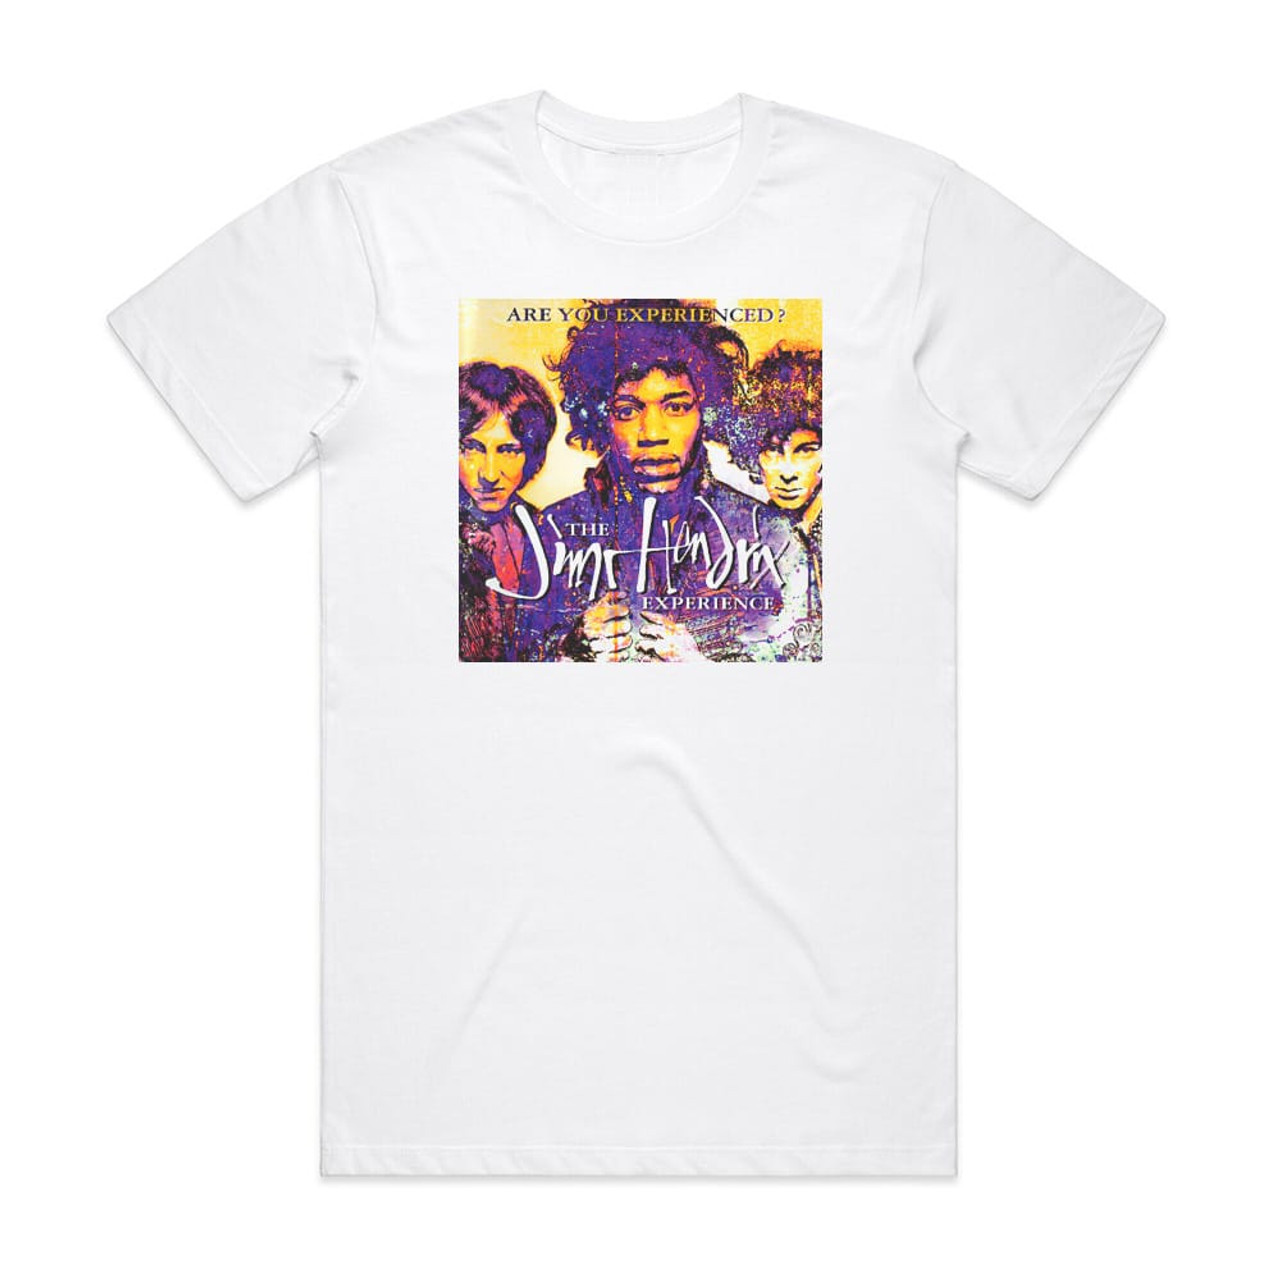 The Jimi Hendrix Experience Are You Experienced Album Cover T-Shirt White